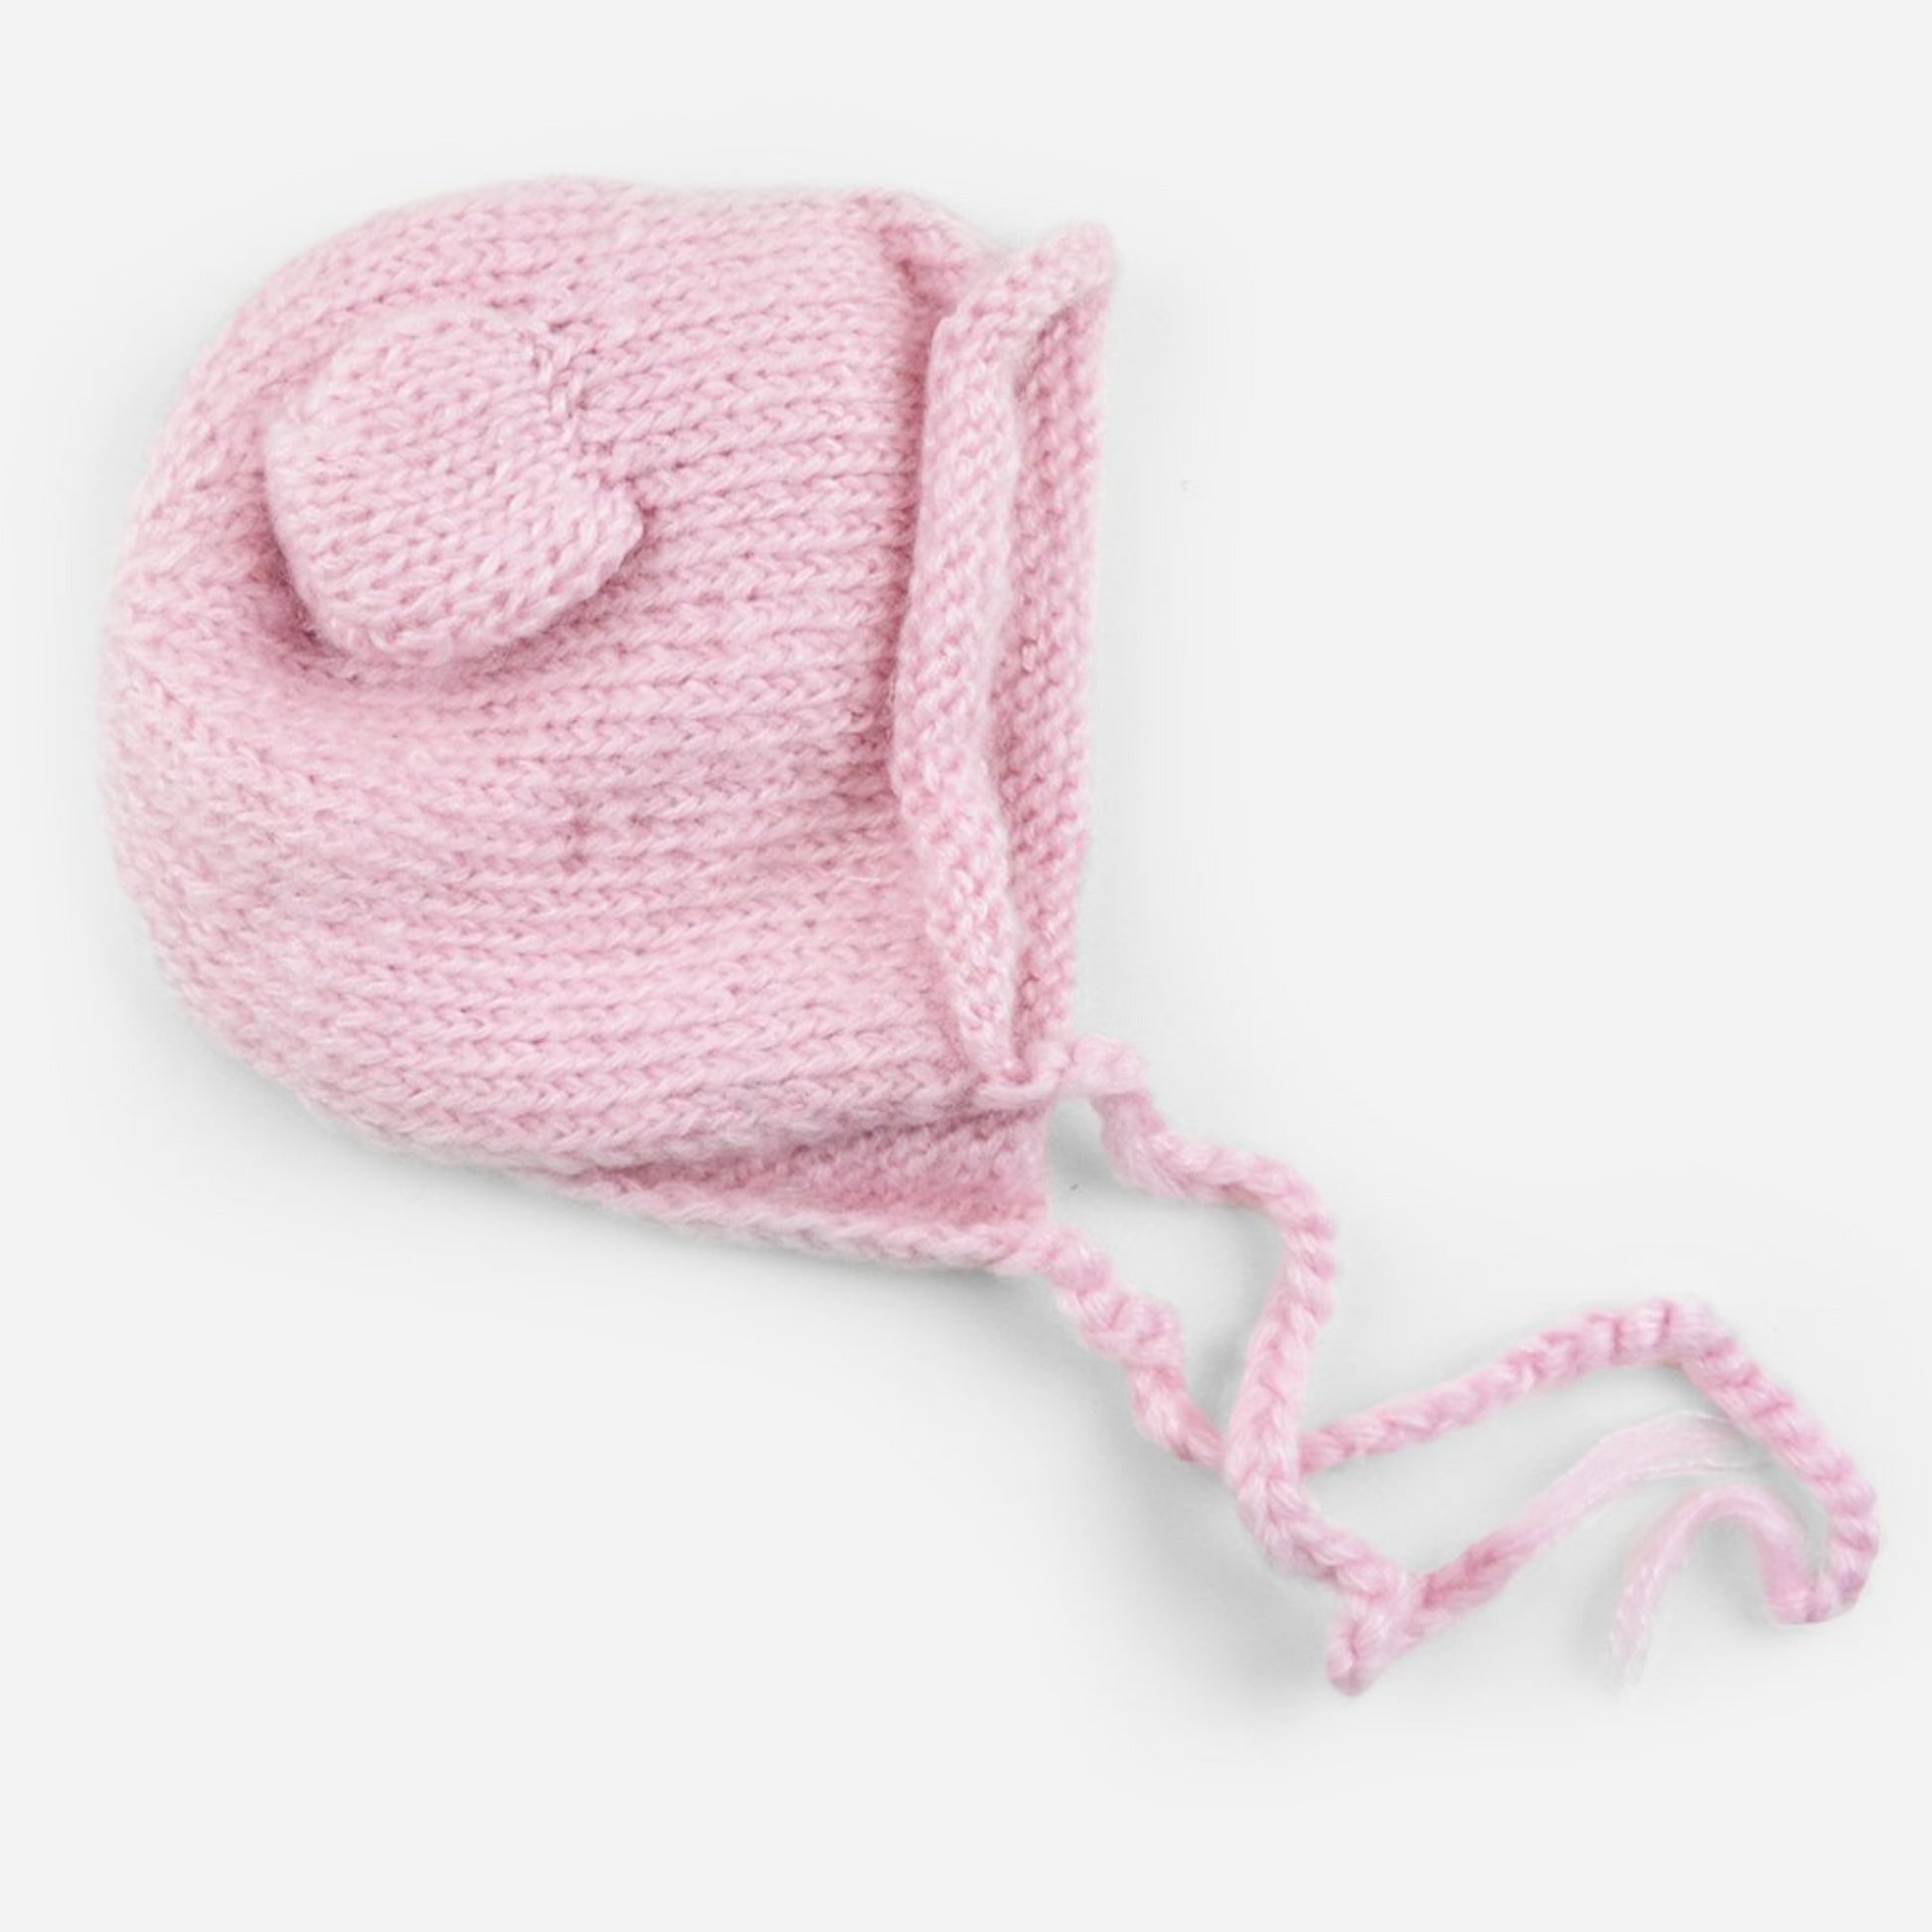 hand knit mohair bonnet with bear ears and tie closure in pink for baby infant toddler